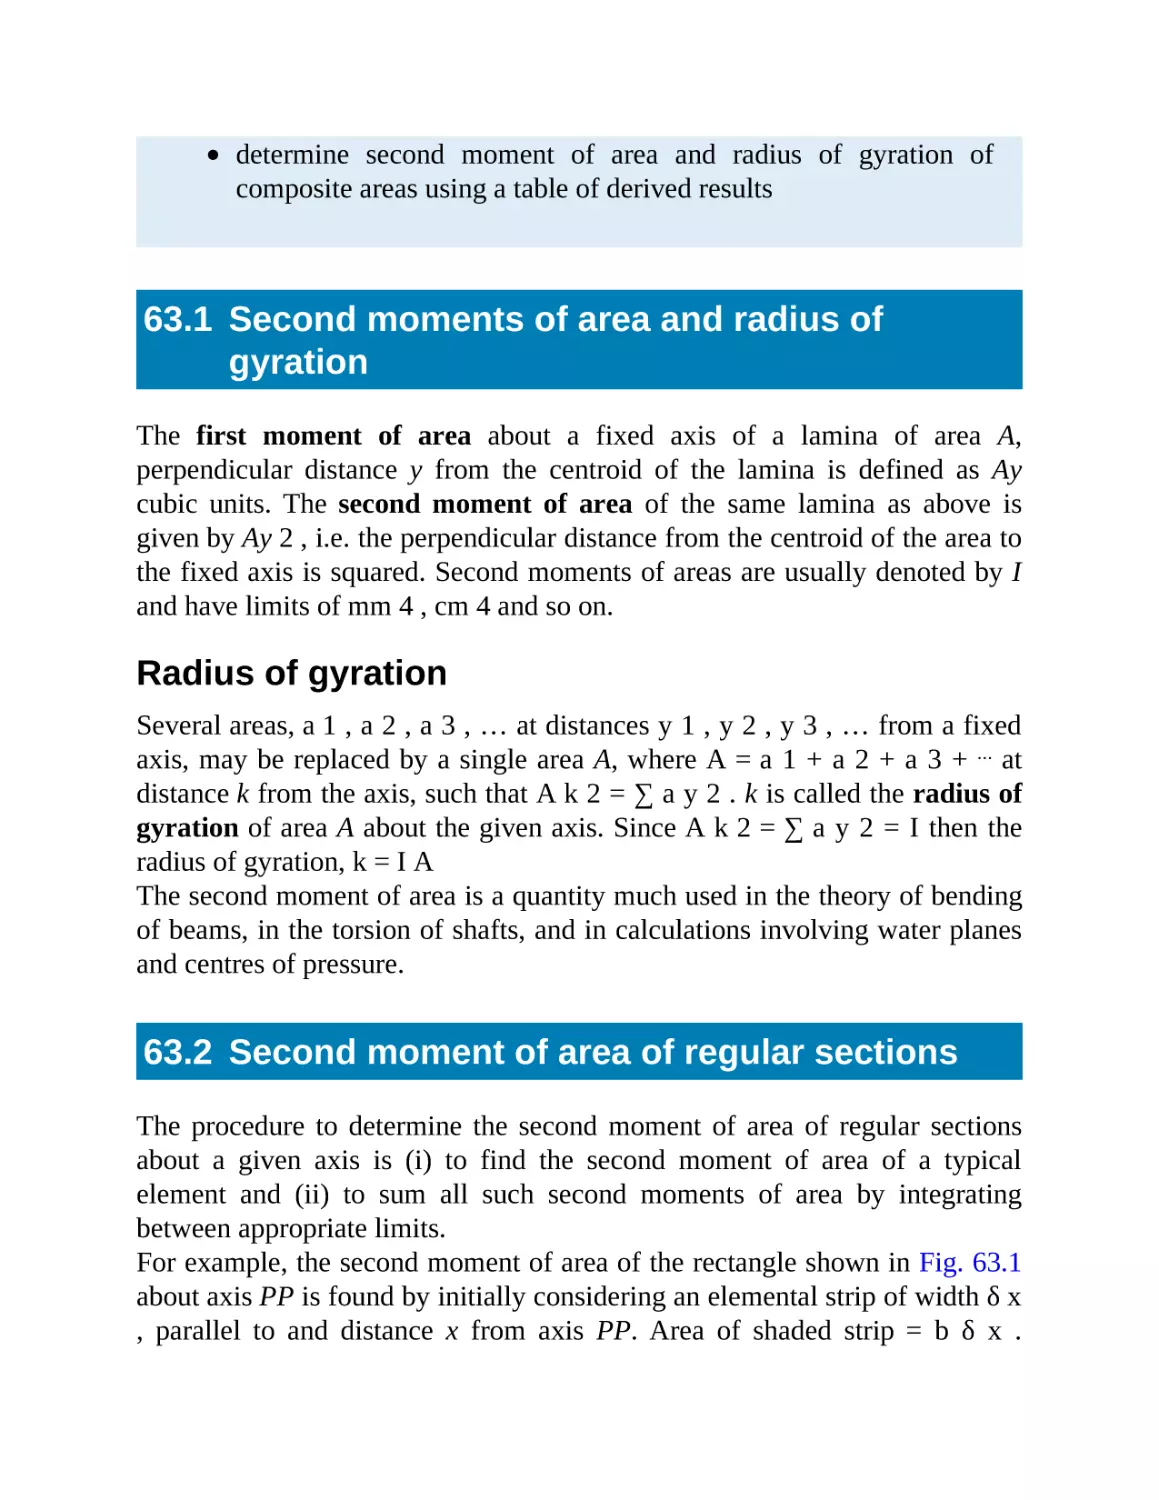 63.1 Second moments of area and radius of gyration
63.2 Second moment of area of regular sections